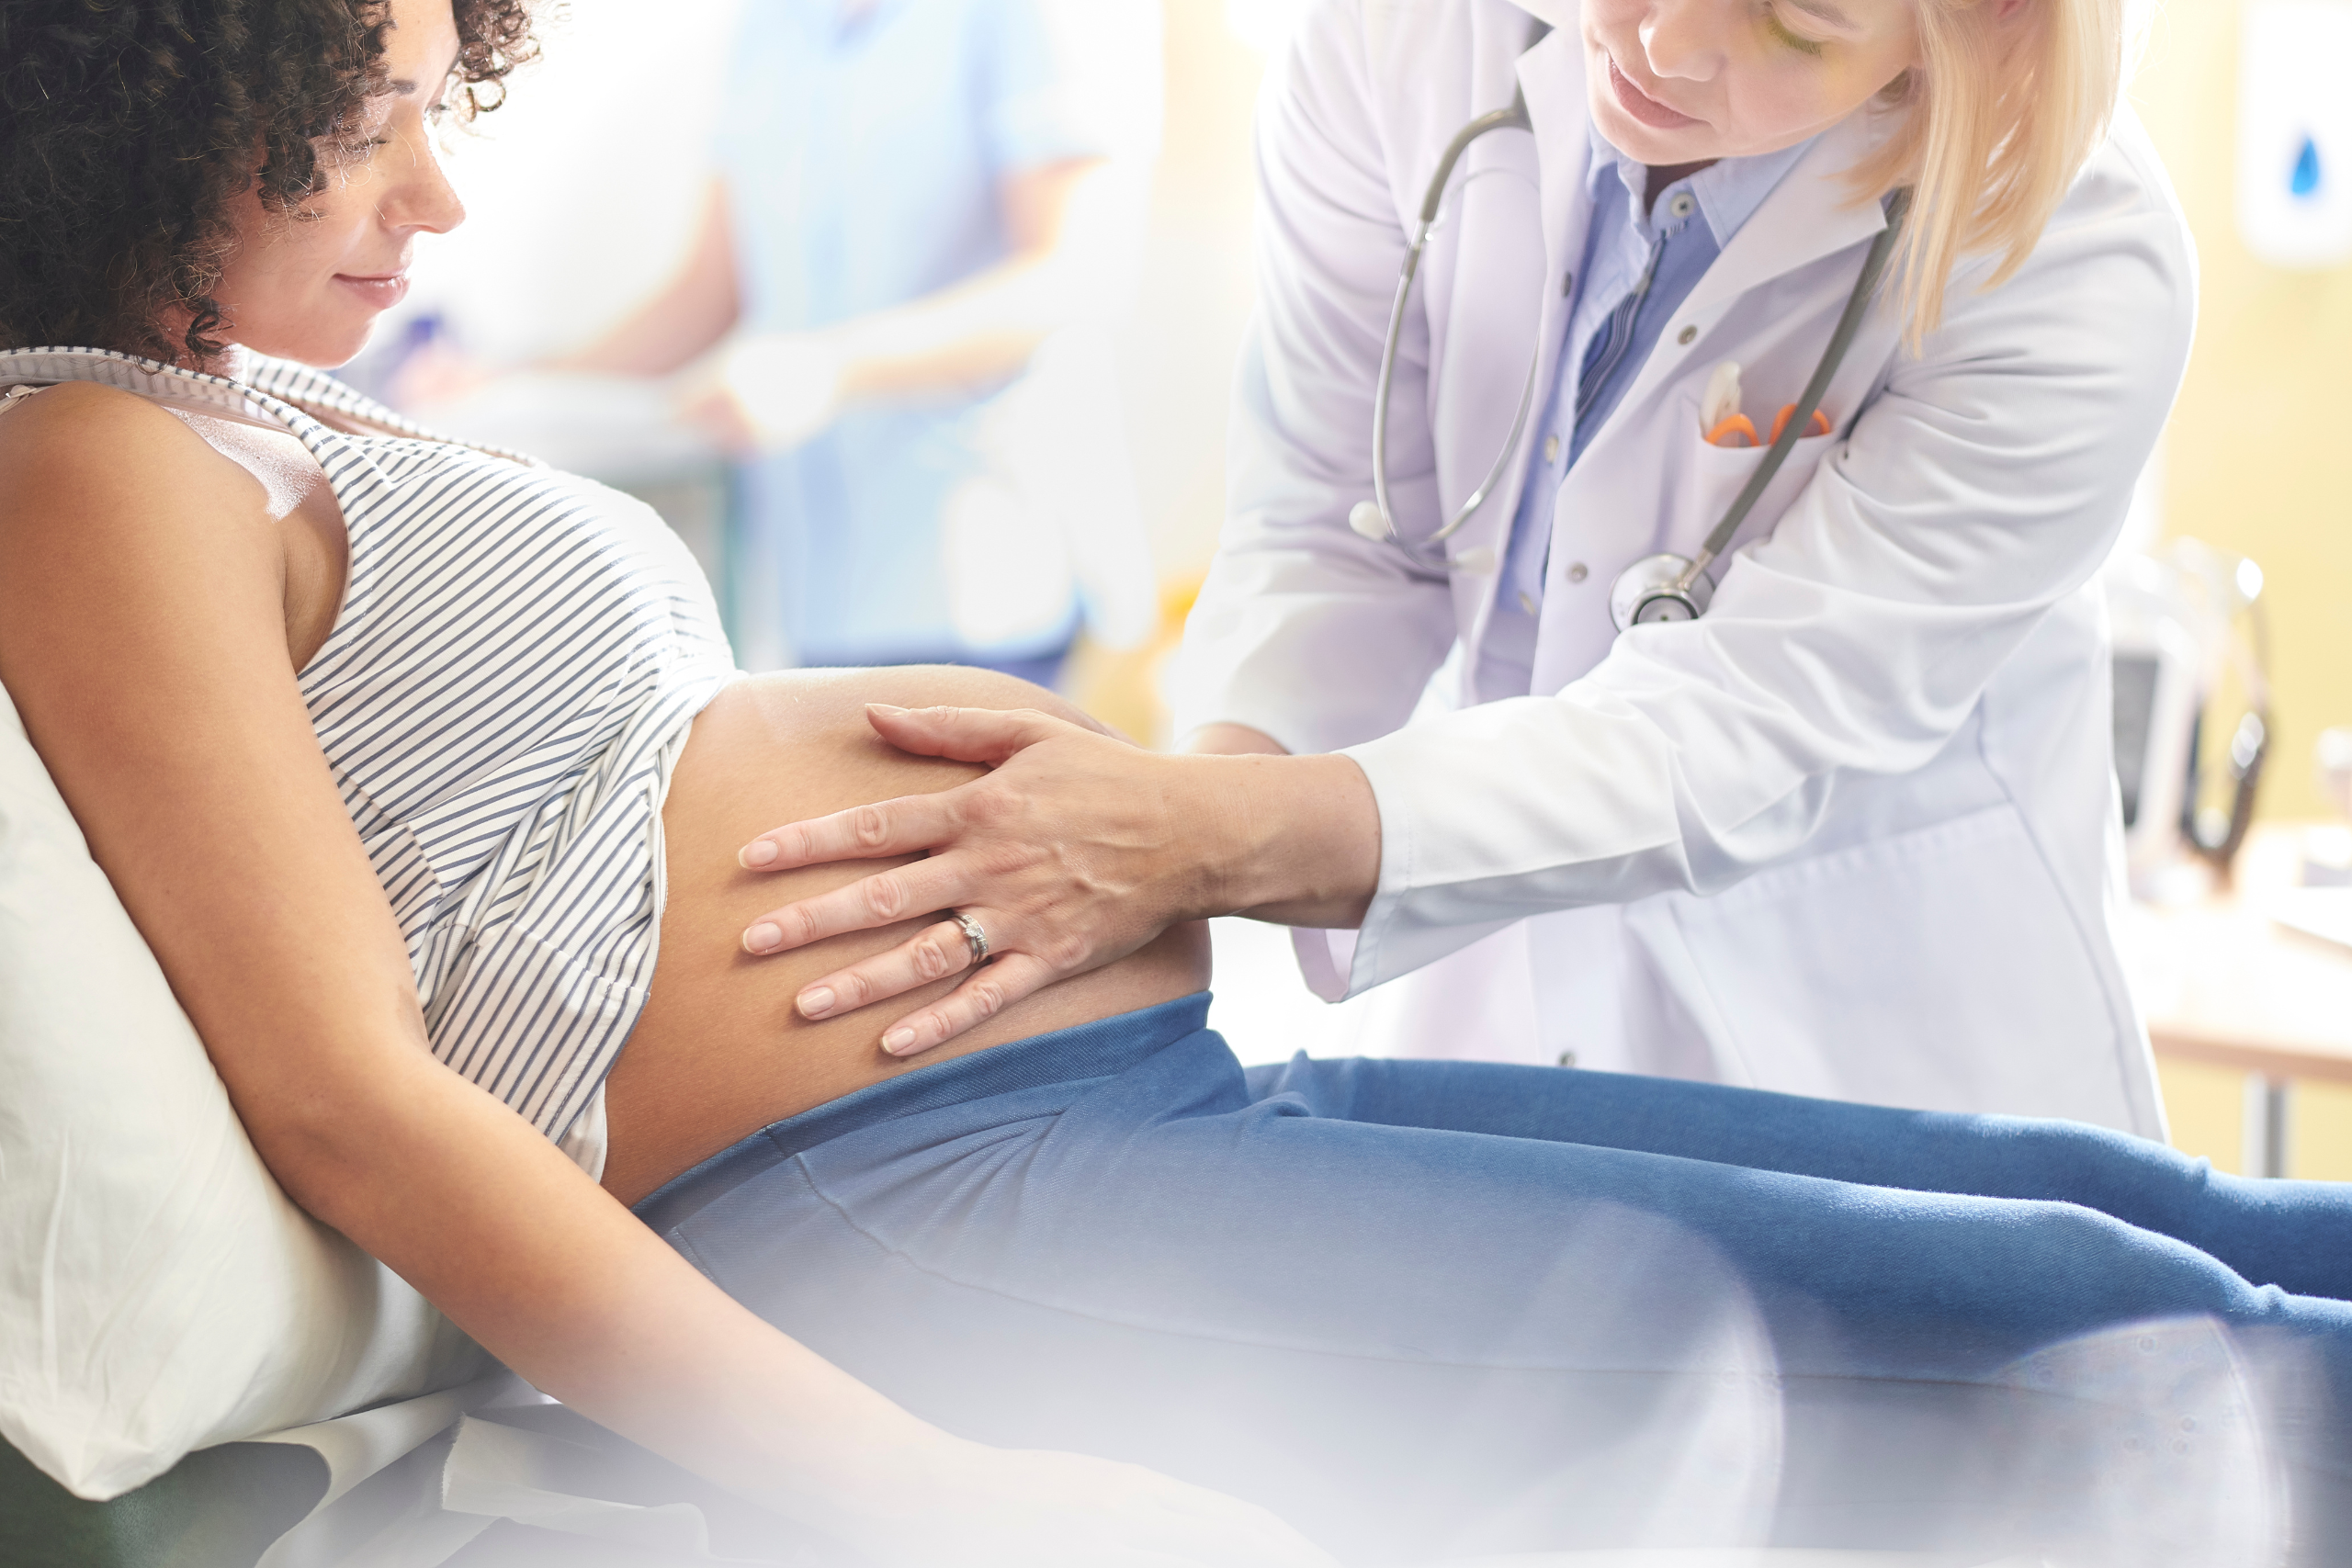 Common Emergencies in Early Pregnancy and How to Prevent Them